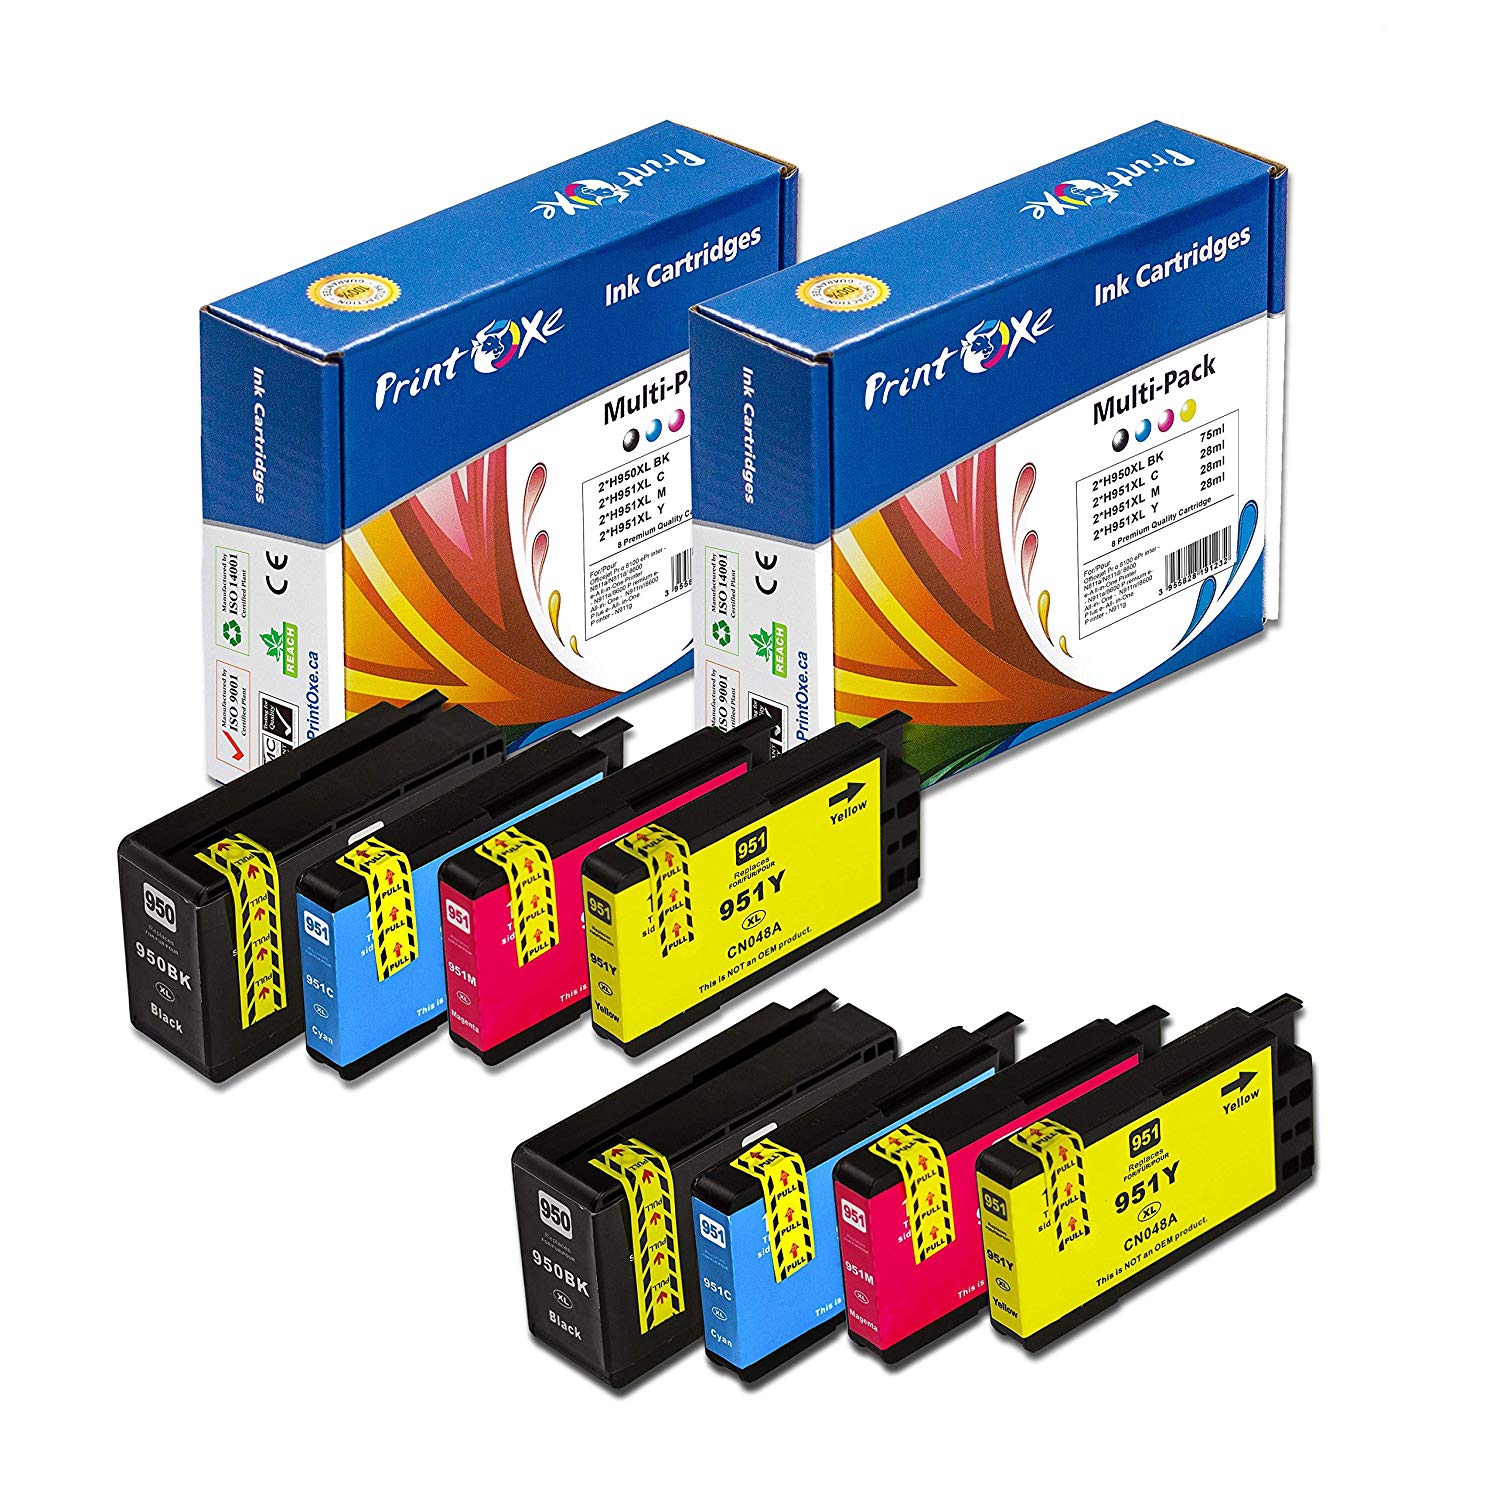 PRINTOXE® 950XL 951XL Compatible 2 Sets of 8 Ink Cartridges 950 / 951 High Yield for HP OfficeJet Pro 8100 / 8600 and others